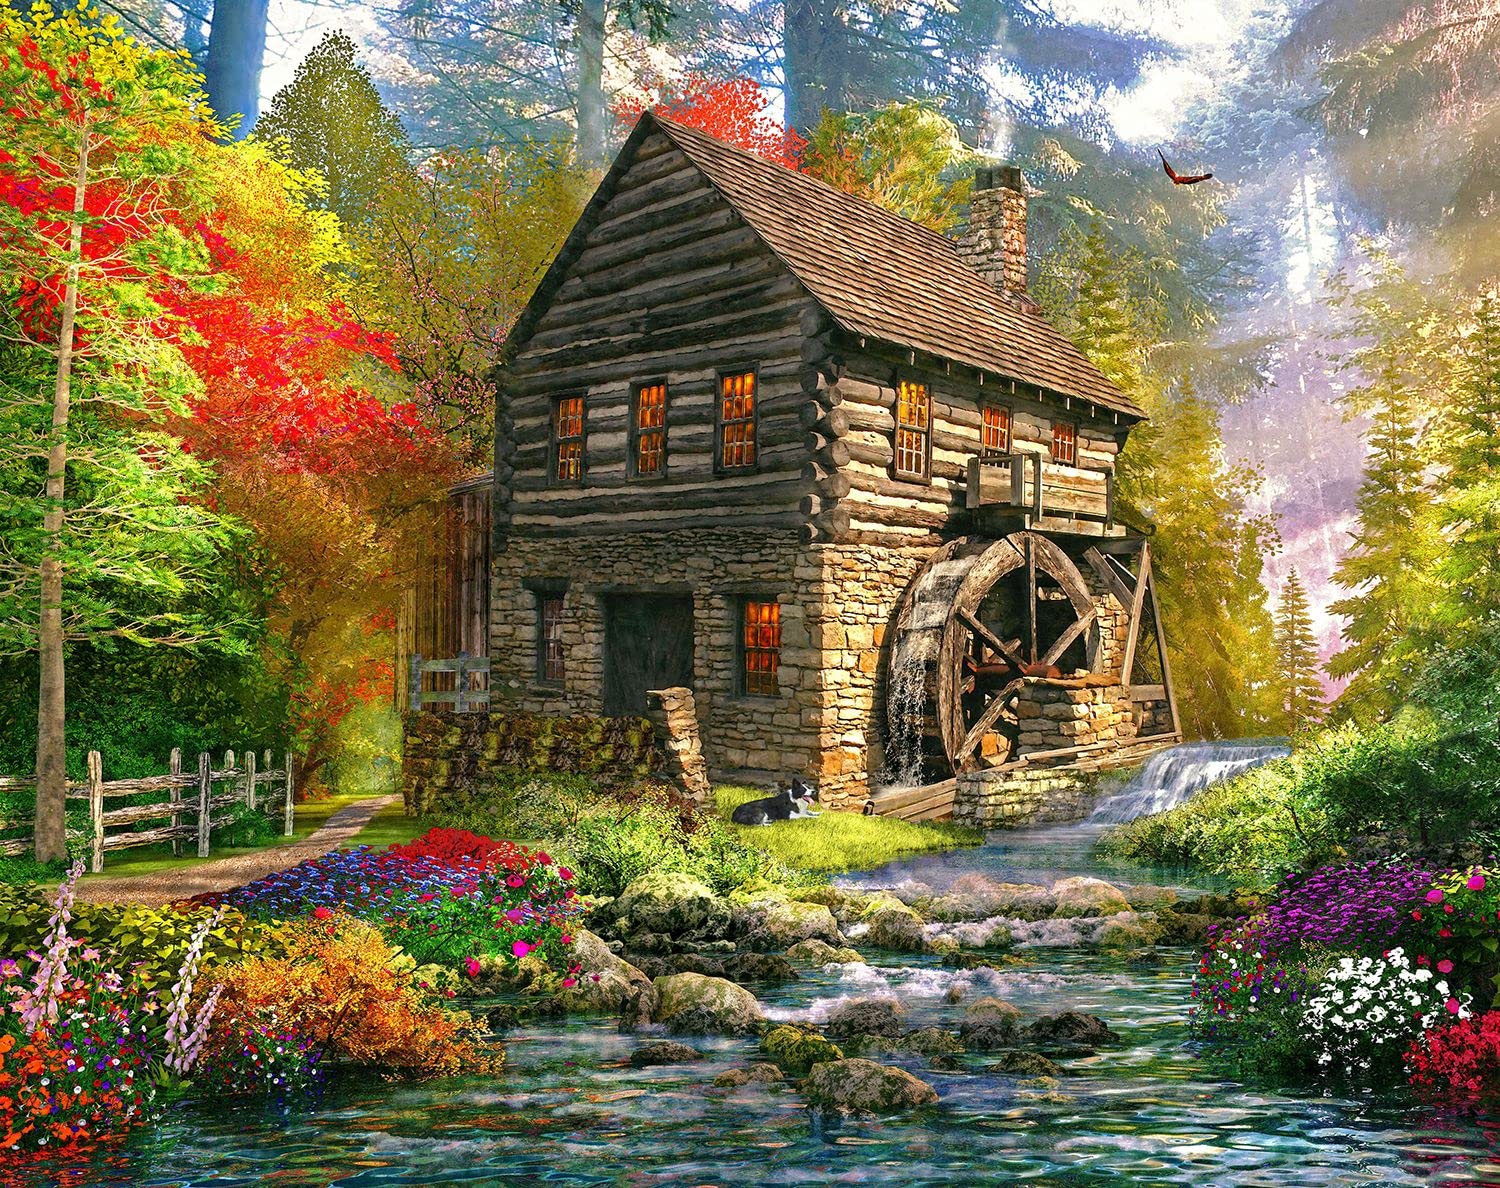 Springbok's 1000 Piece Jigsaw Puzzle Mill Cottage - Made in USA